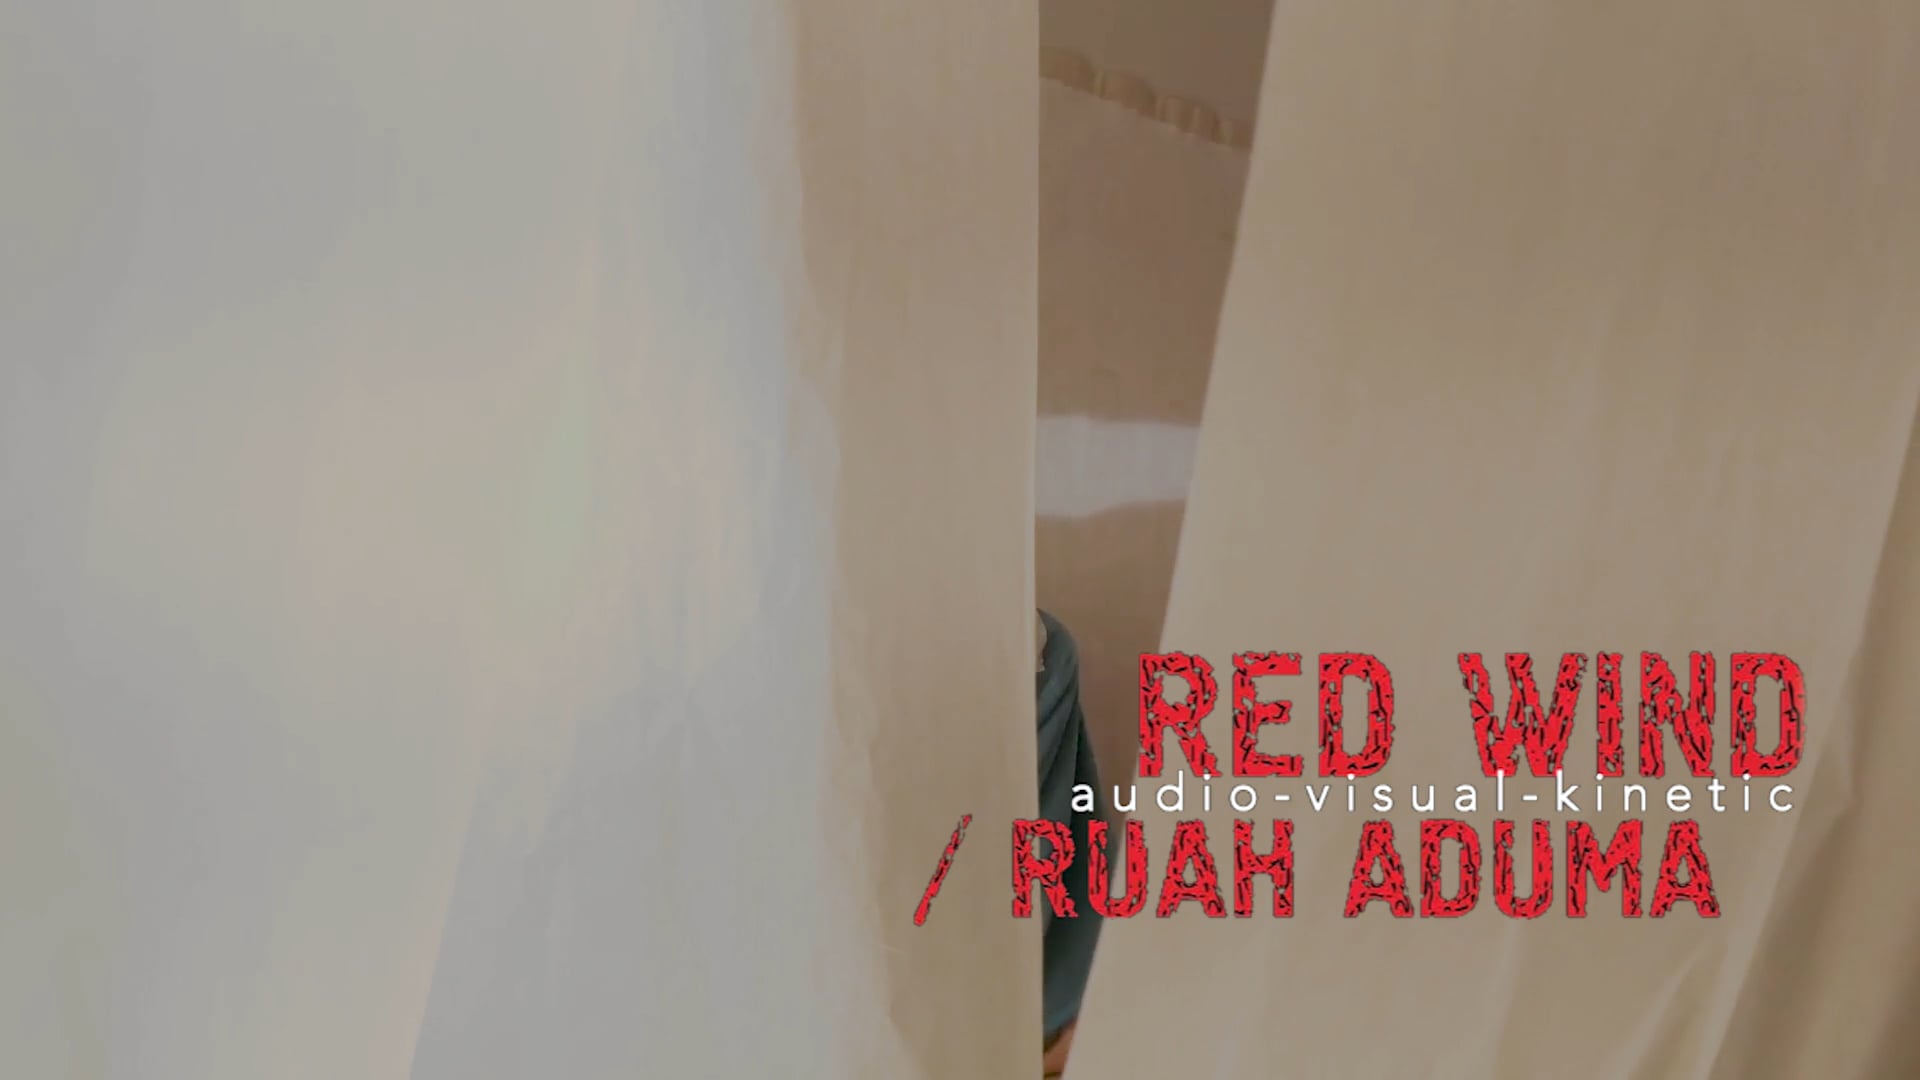 Red Wind / Ruah Aduma, a poetic abstract installation-performance